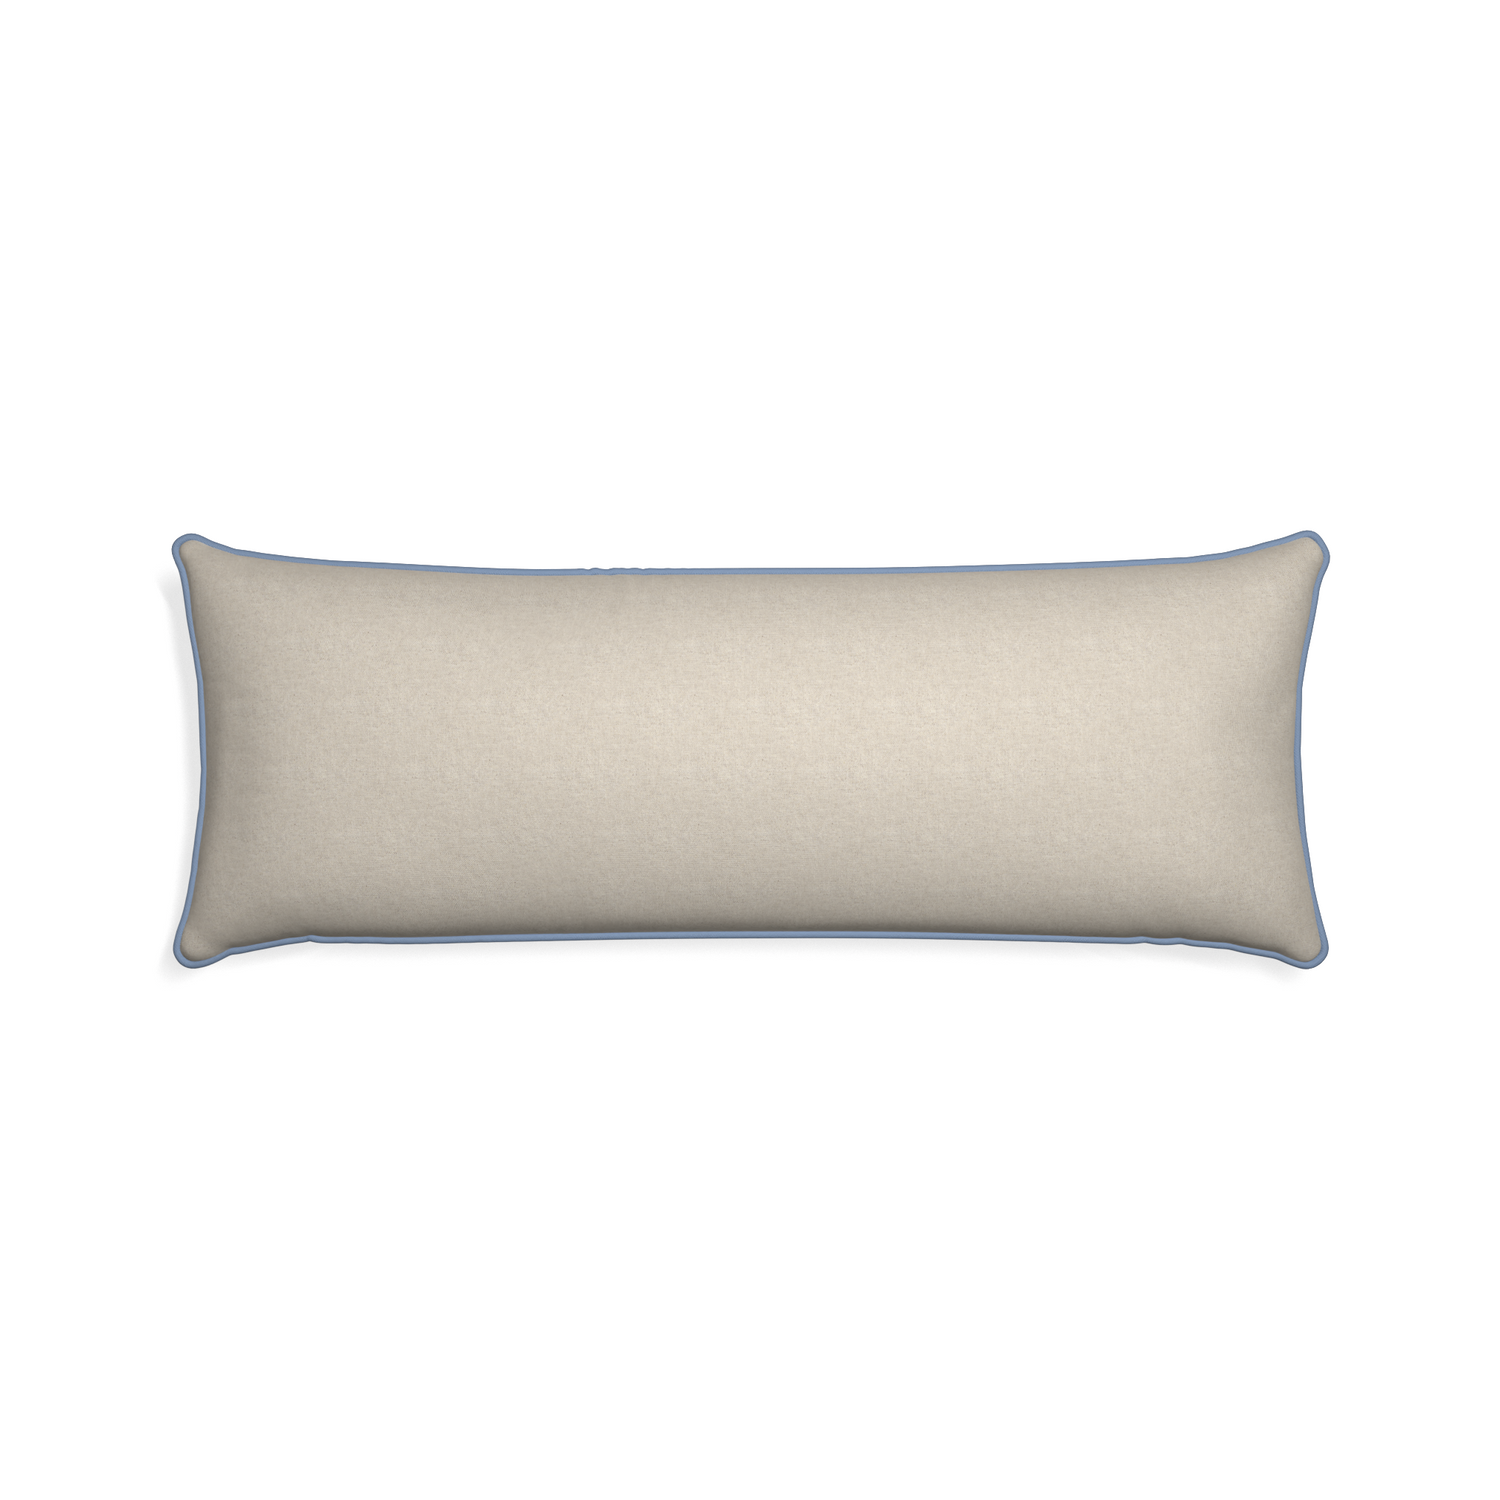 Xl-lumbar oat custom light brownpillow with sky piping on white background